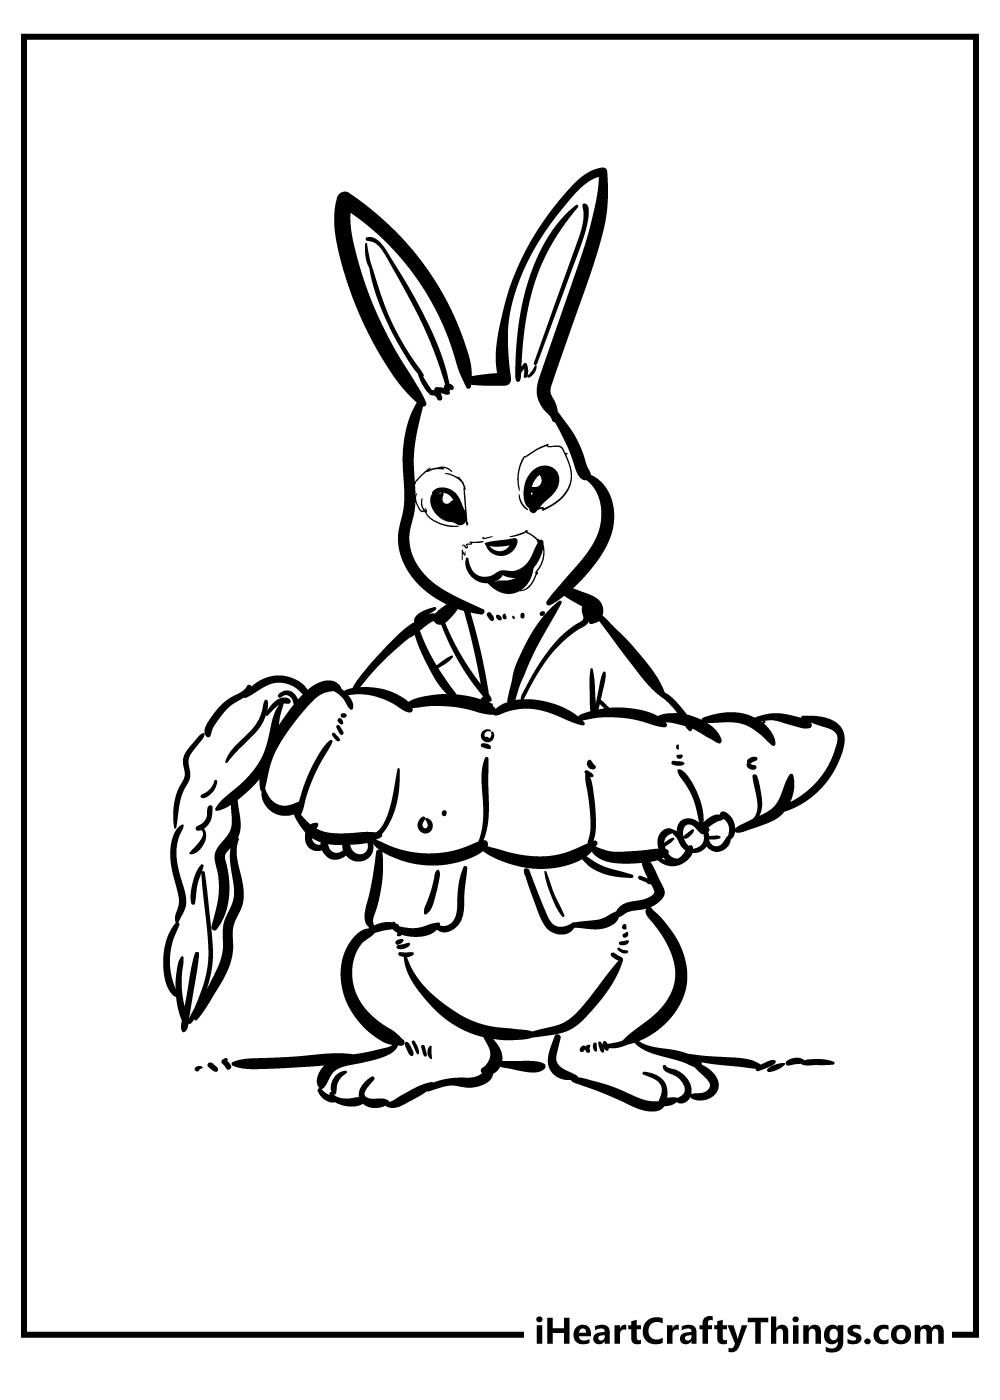 Peter Rabbit Coloring Pages free pdf download